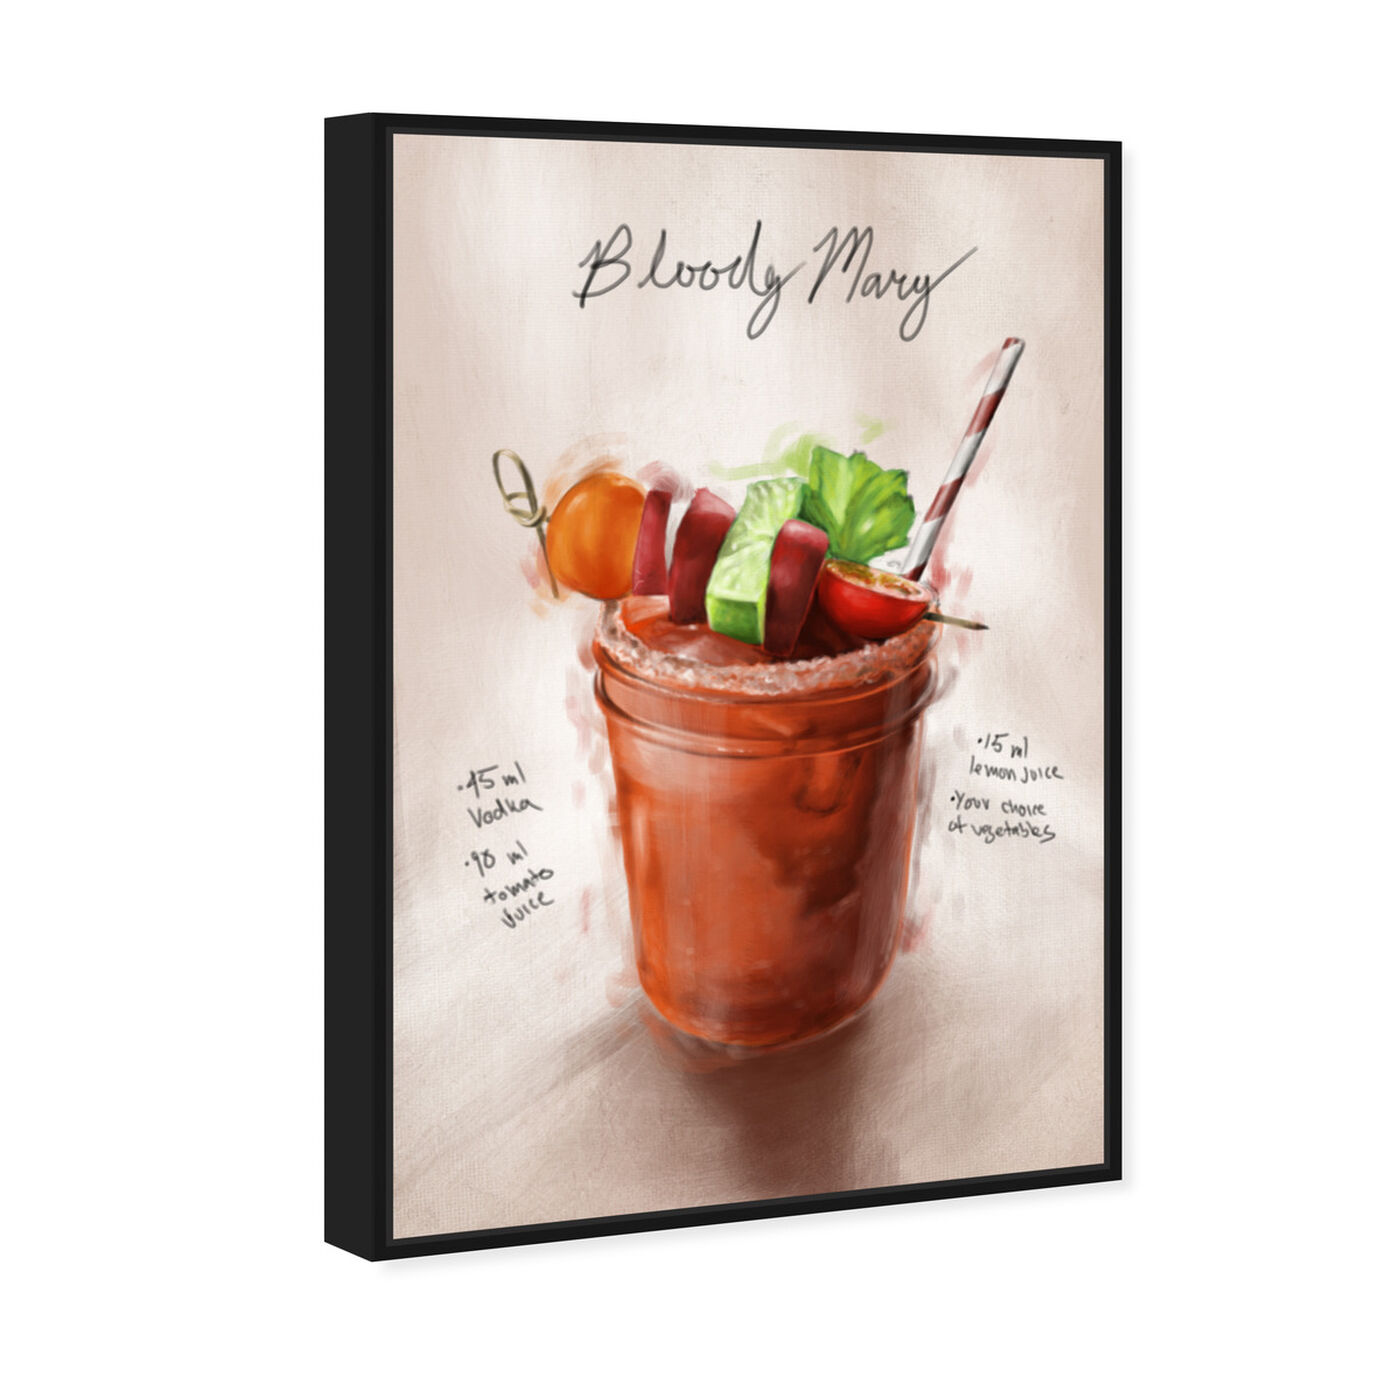 Angled view of Bloody Mary featuring drinks and spirits and cocktails art.